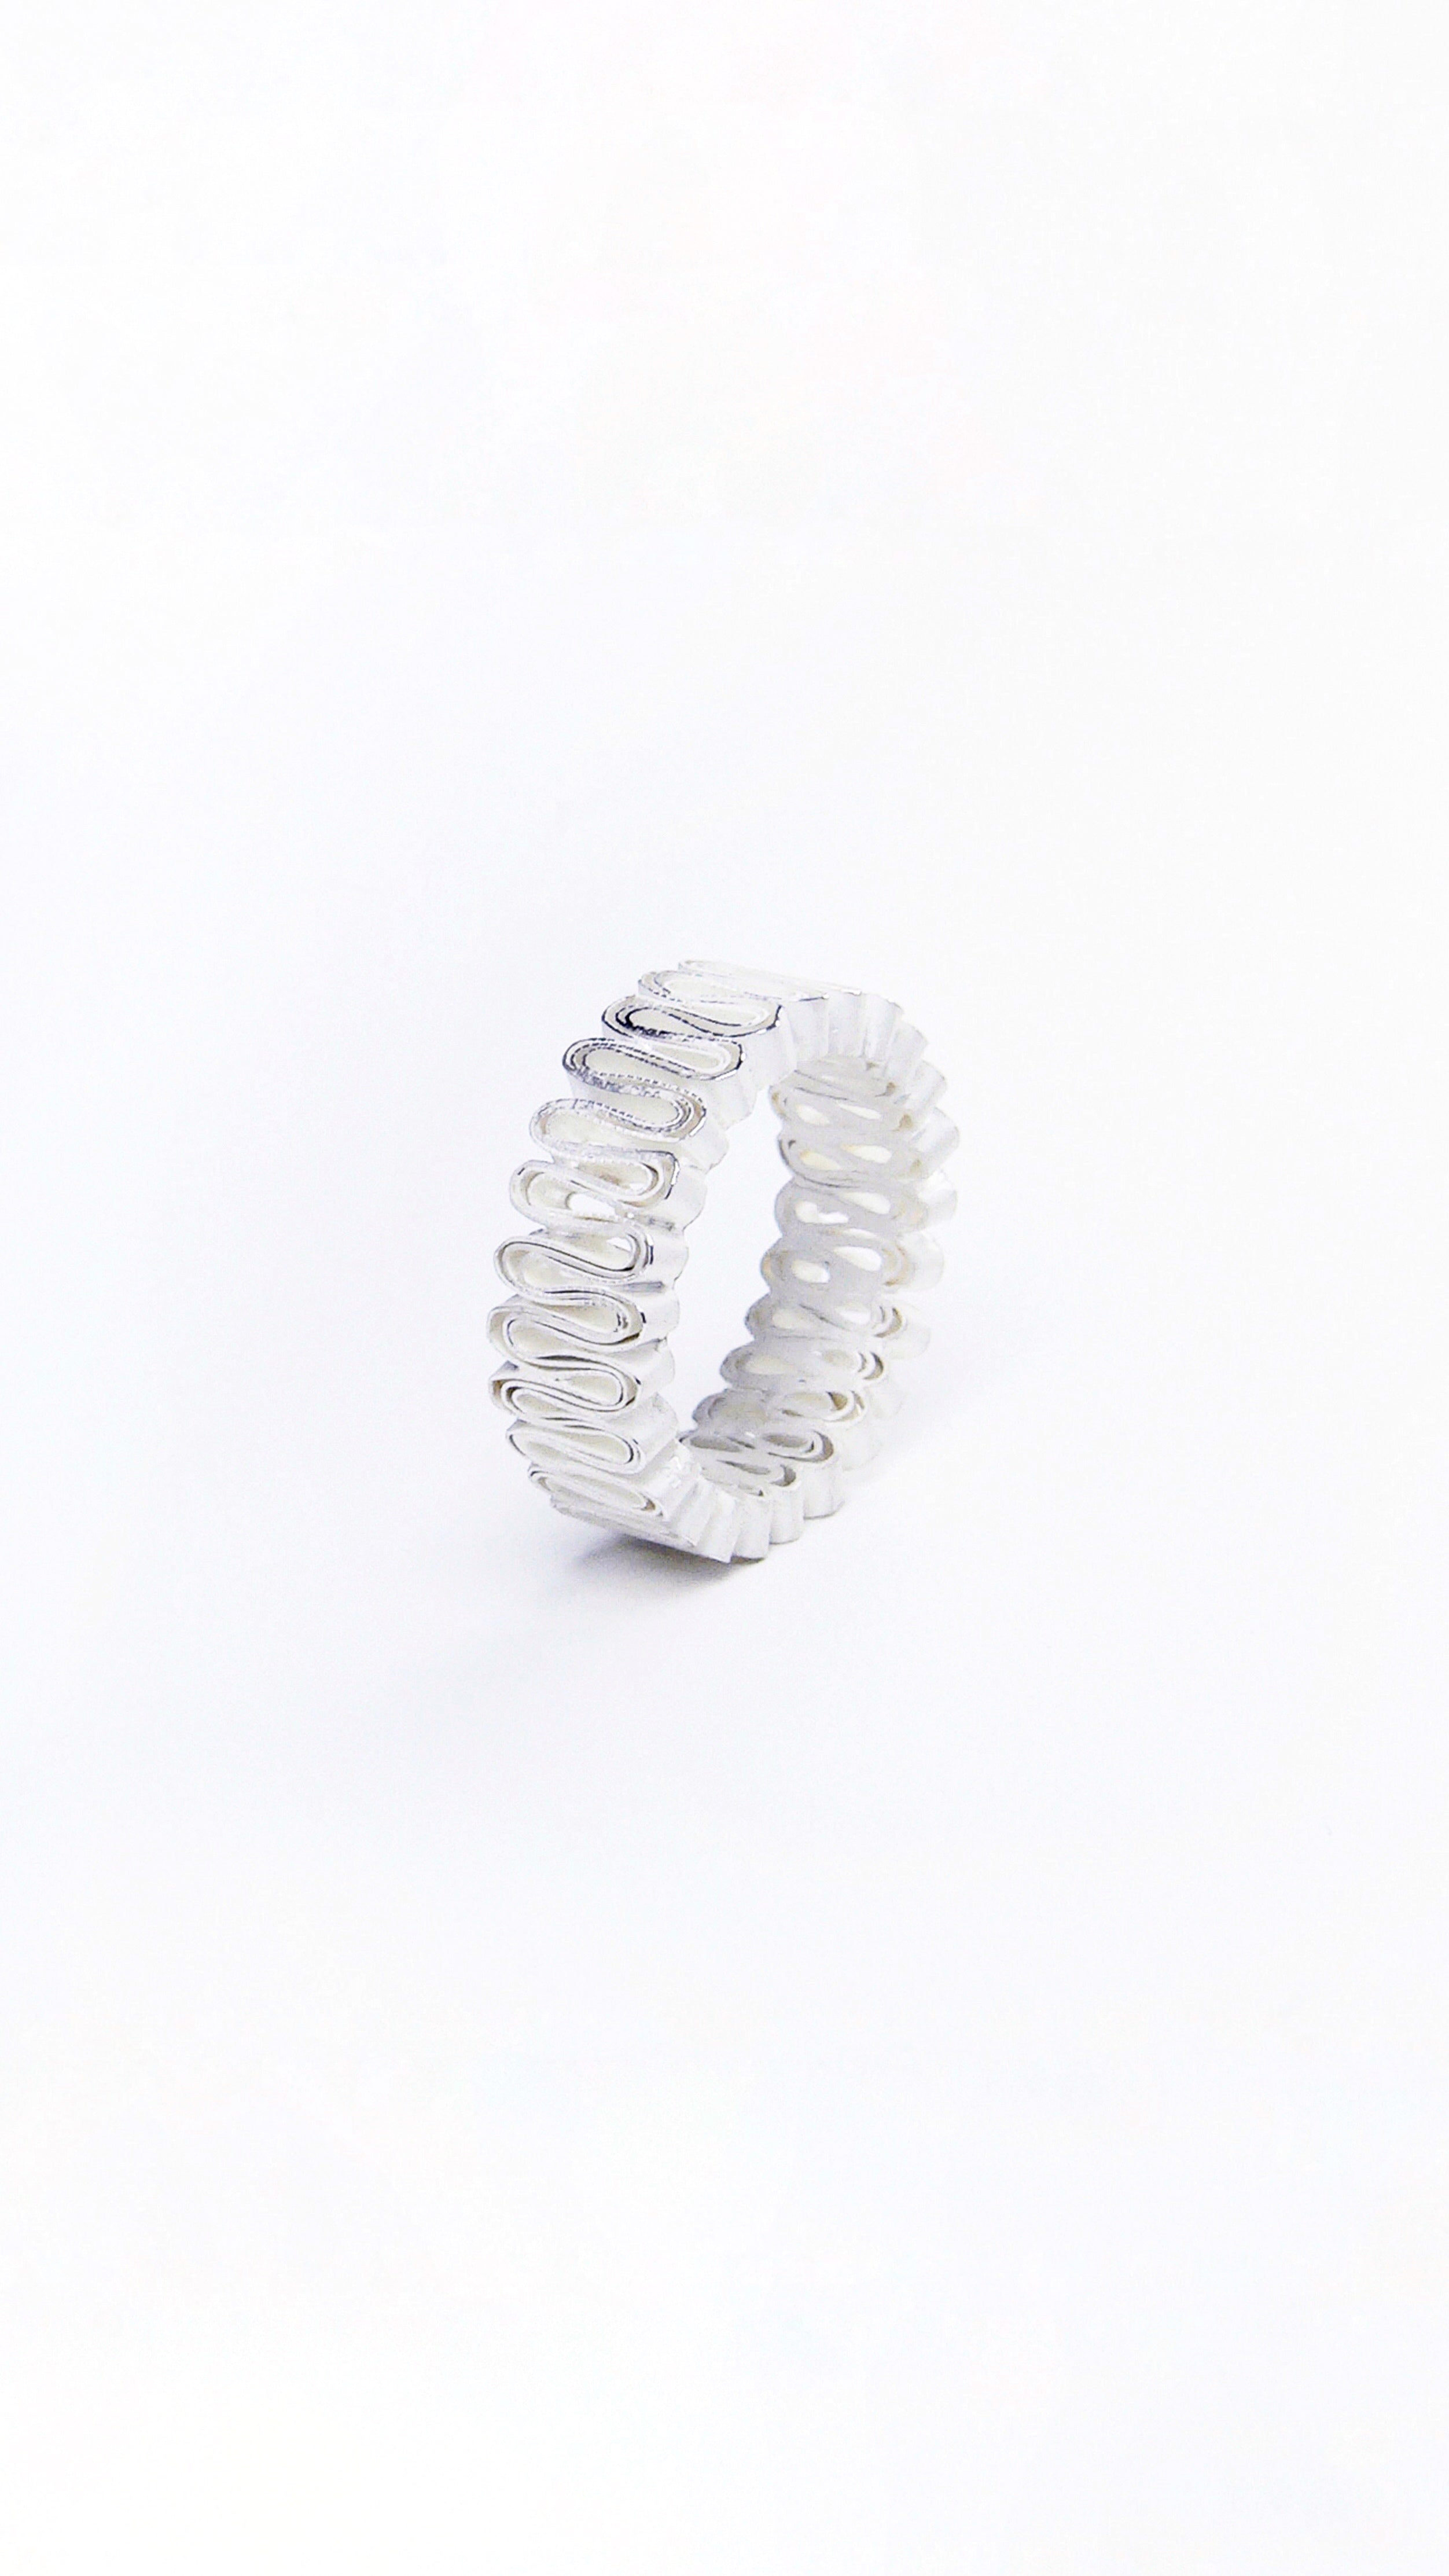 Sinuosite Maille 7 Ring